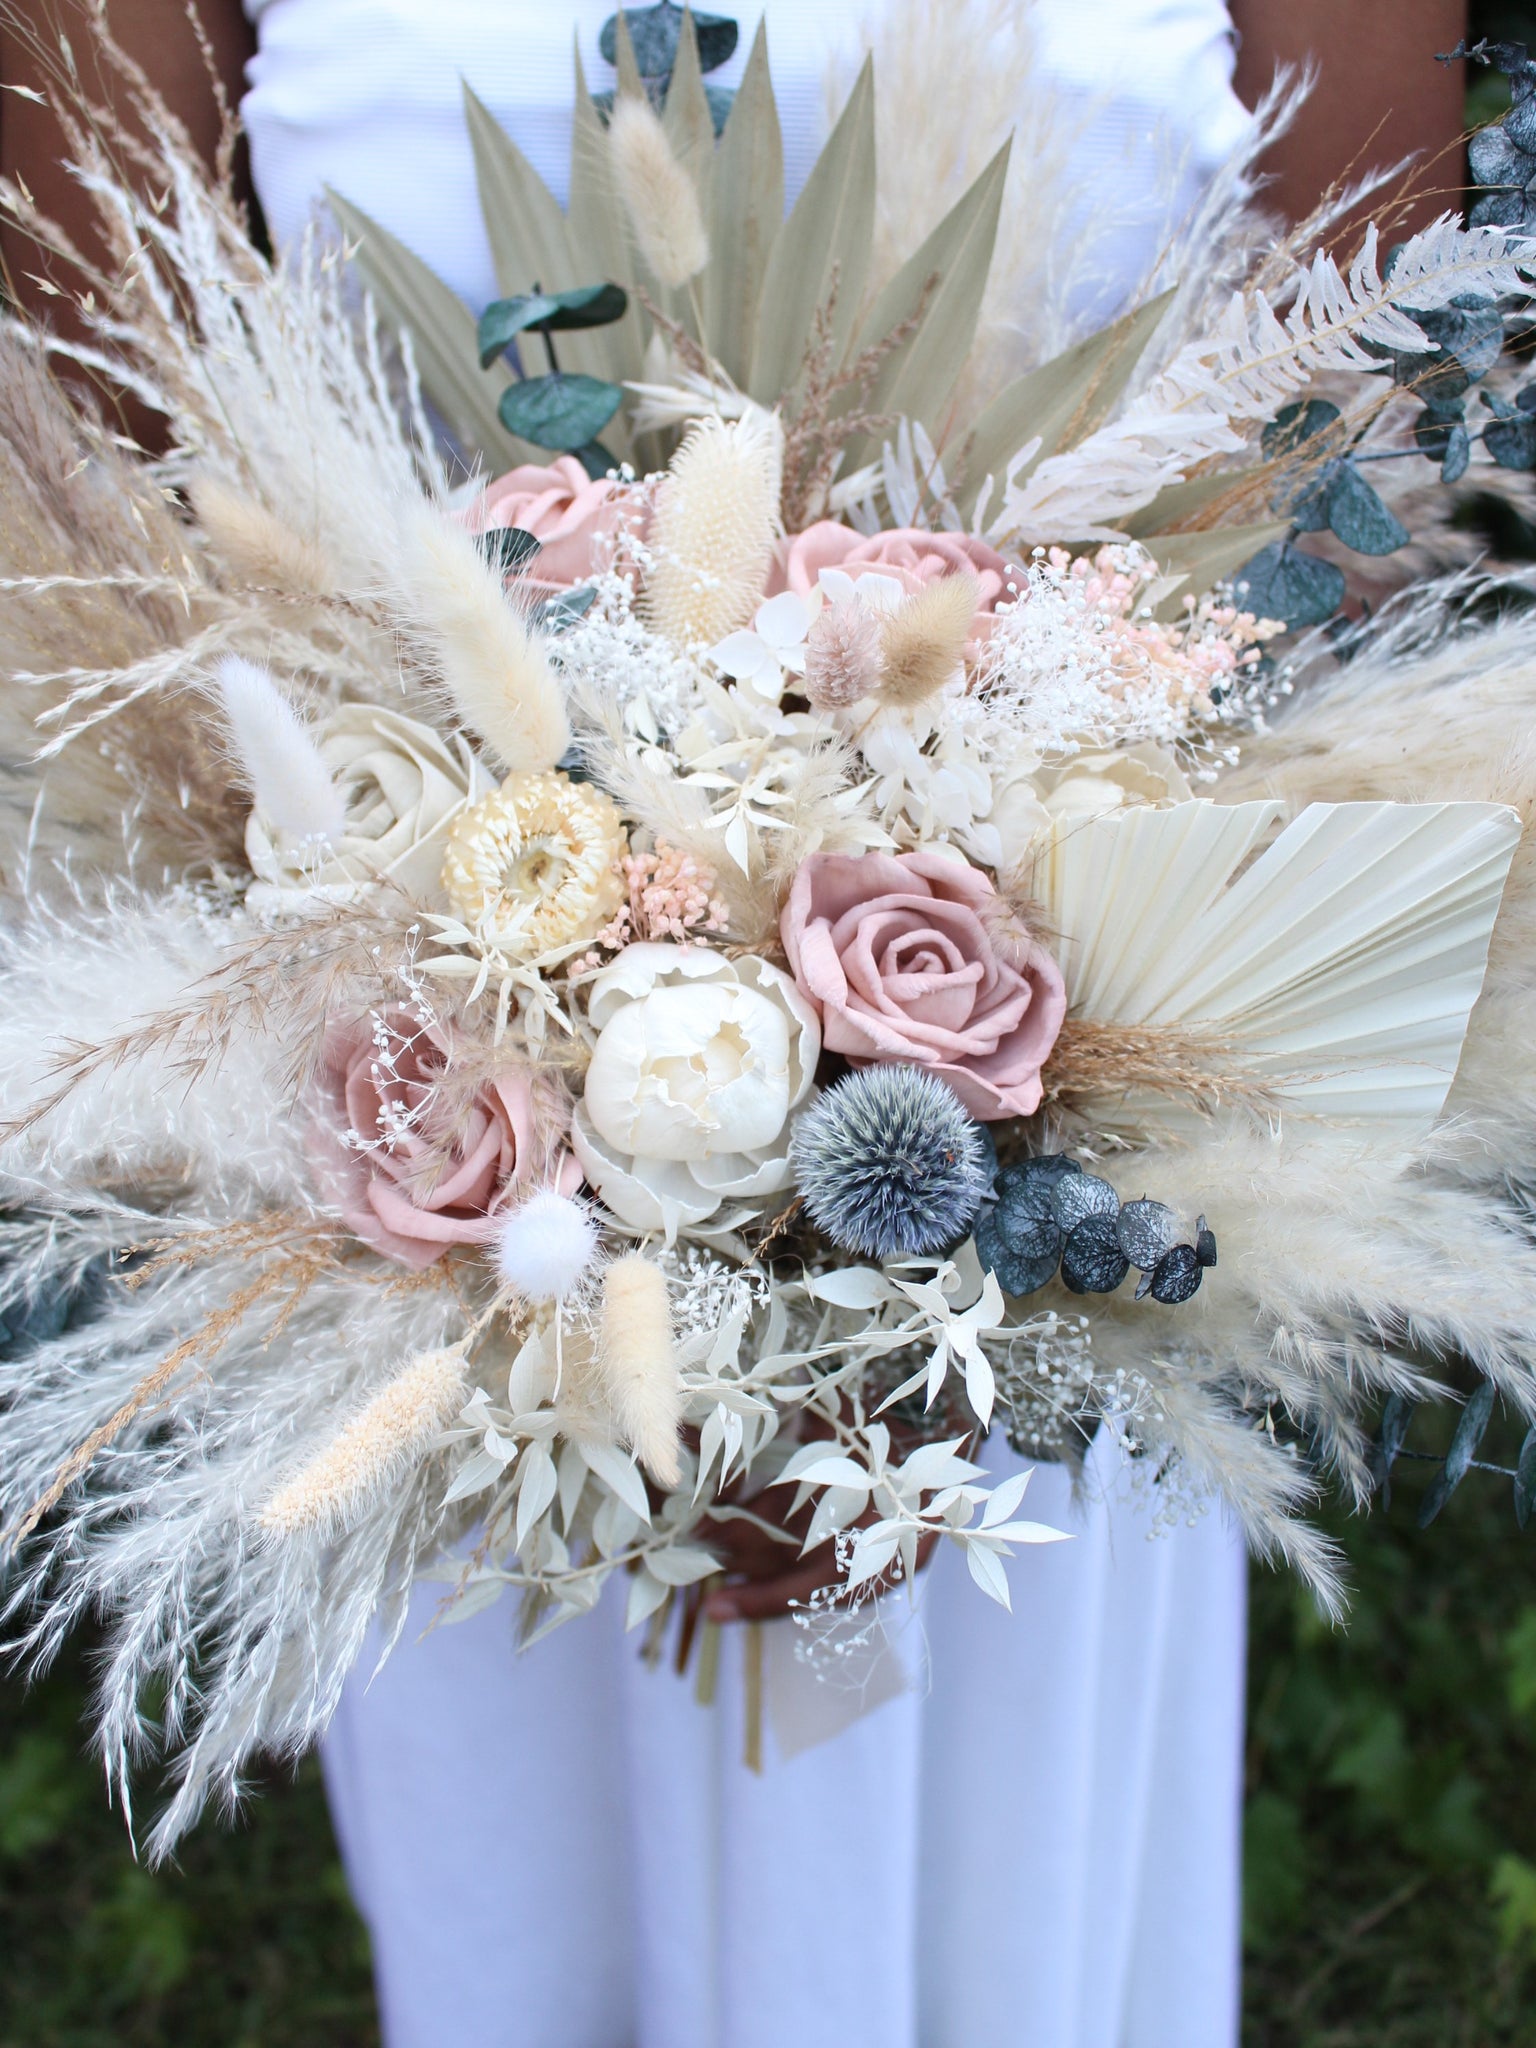 Burlap Bouquet Wrap Will Make Your Flowers Beautiful